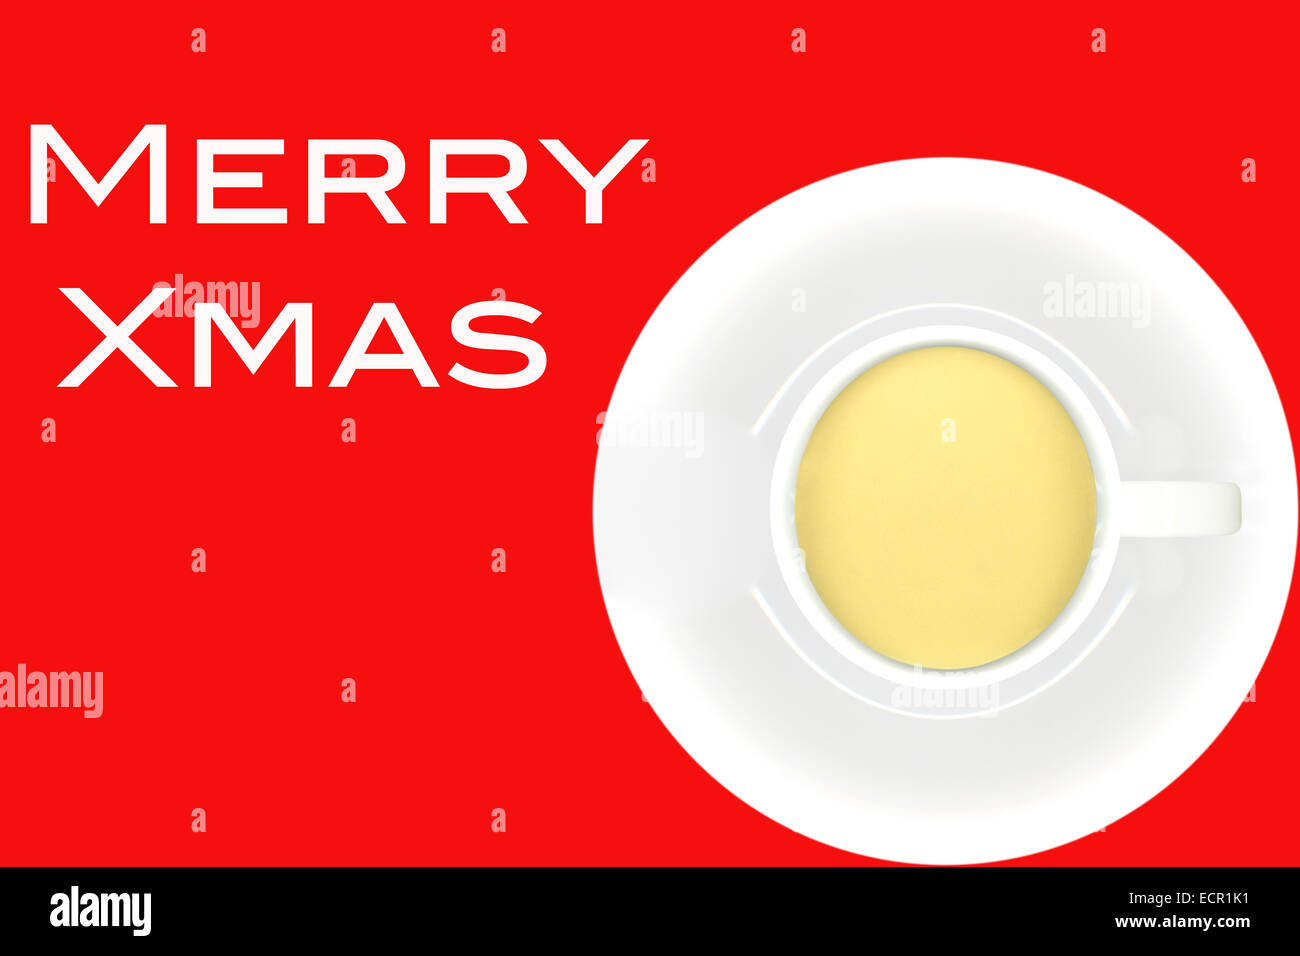 Cup of egg nog and saucer on red background with words MERRY XMAS in white letters. Stock Photo